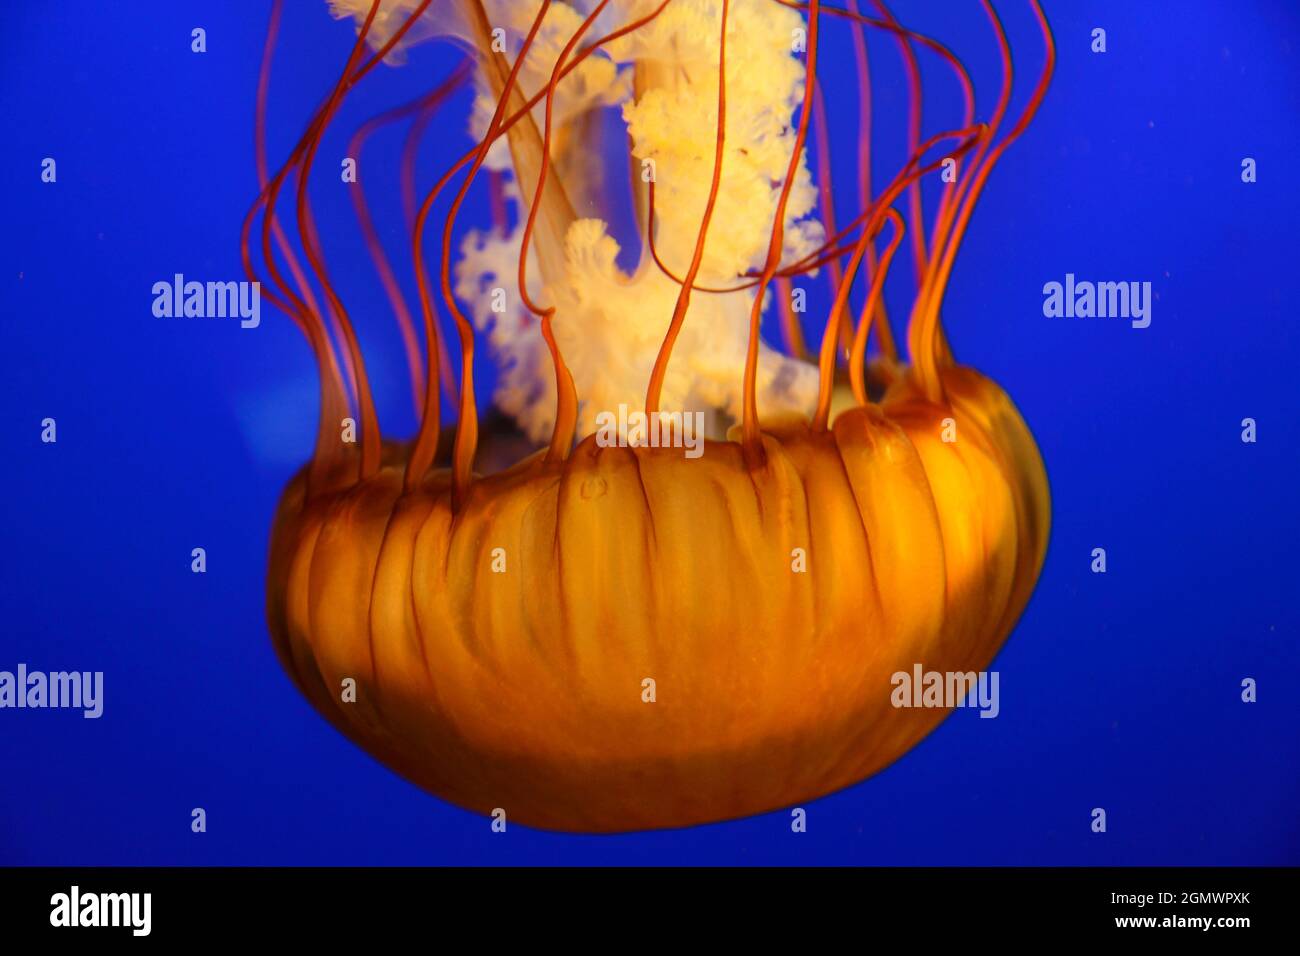 Sea nettle jellyfish (chrysaora fuscescens) at Vancouver AquariumVancouver, Canada - 28 May 2010; no people in view. Avoid! This was seen safely in a Stock Photo